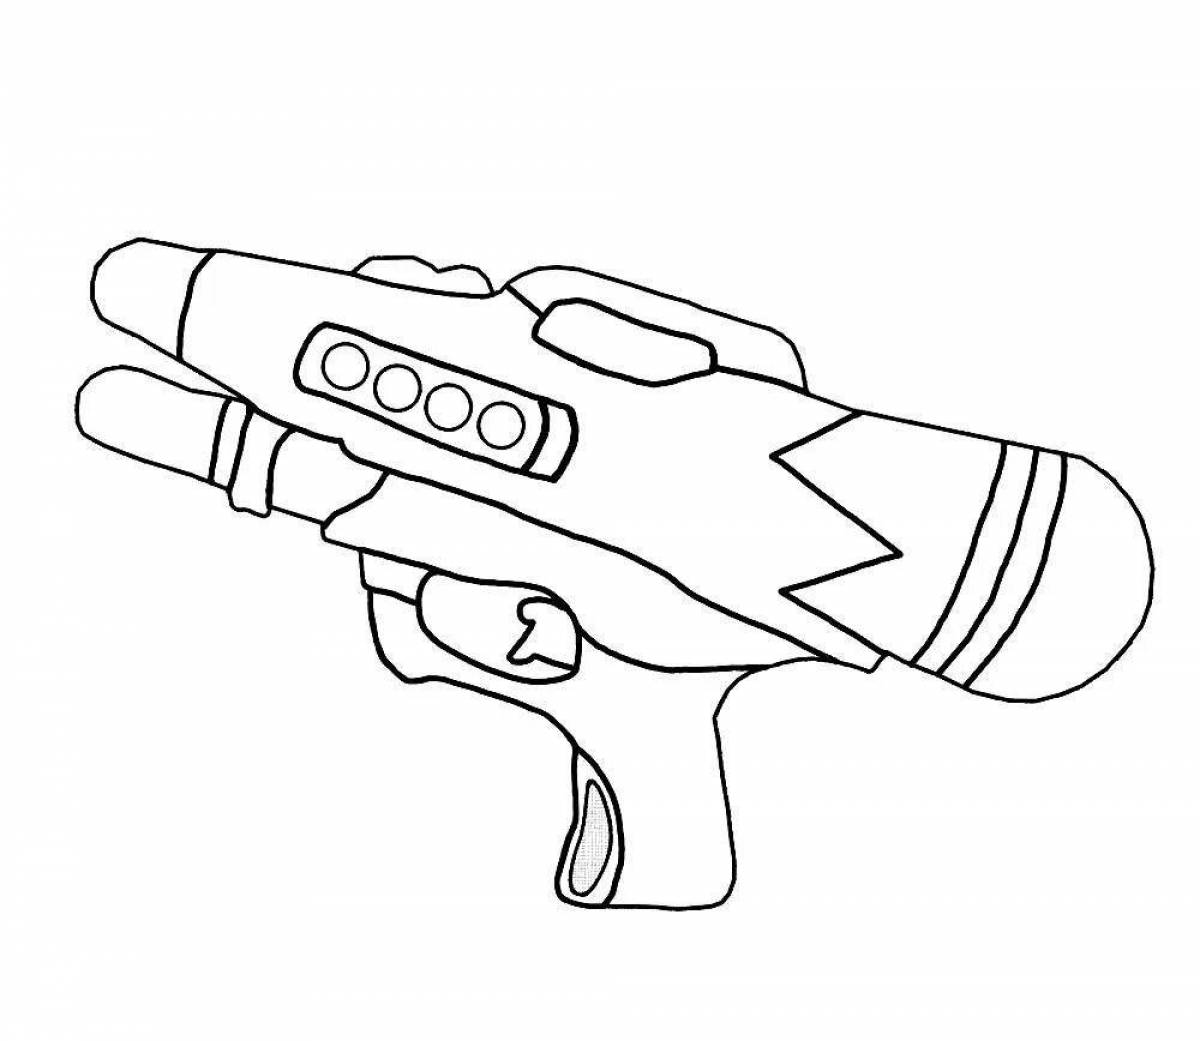 Coloring Page of Chicken Gun for Boys